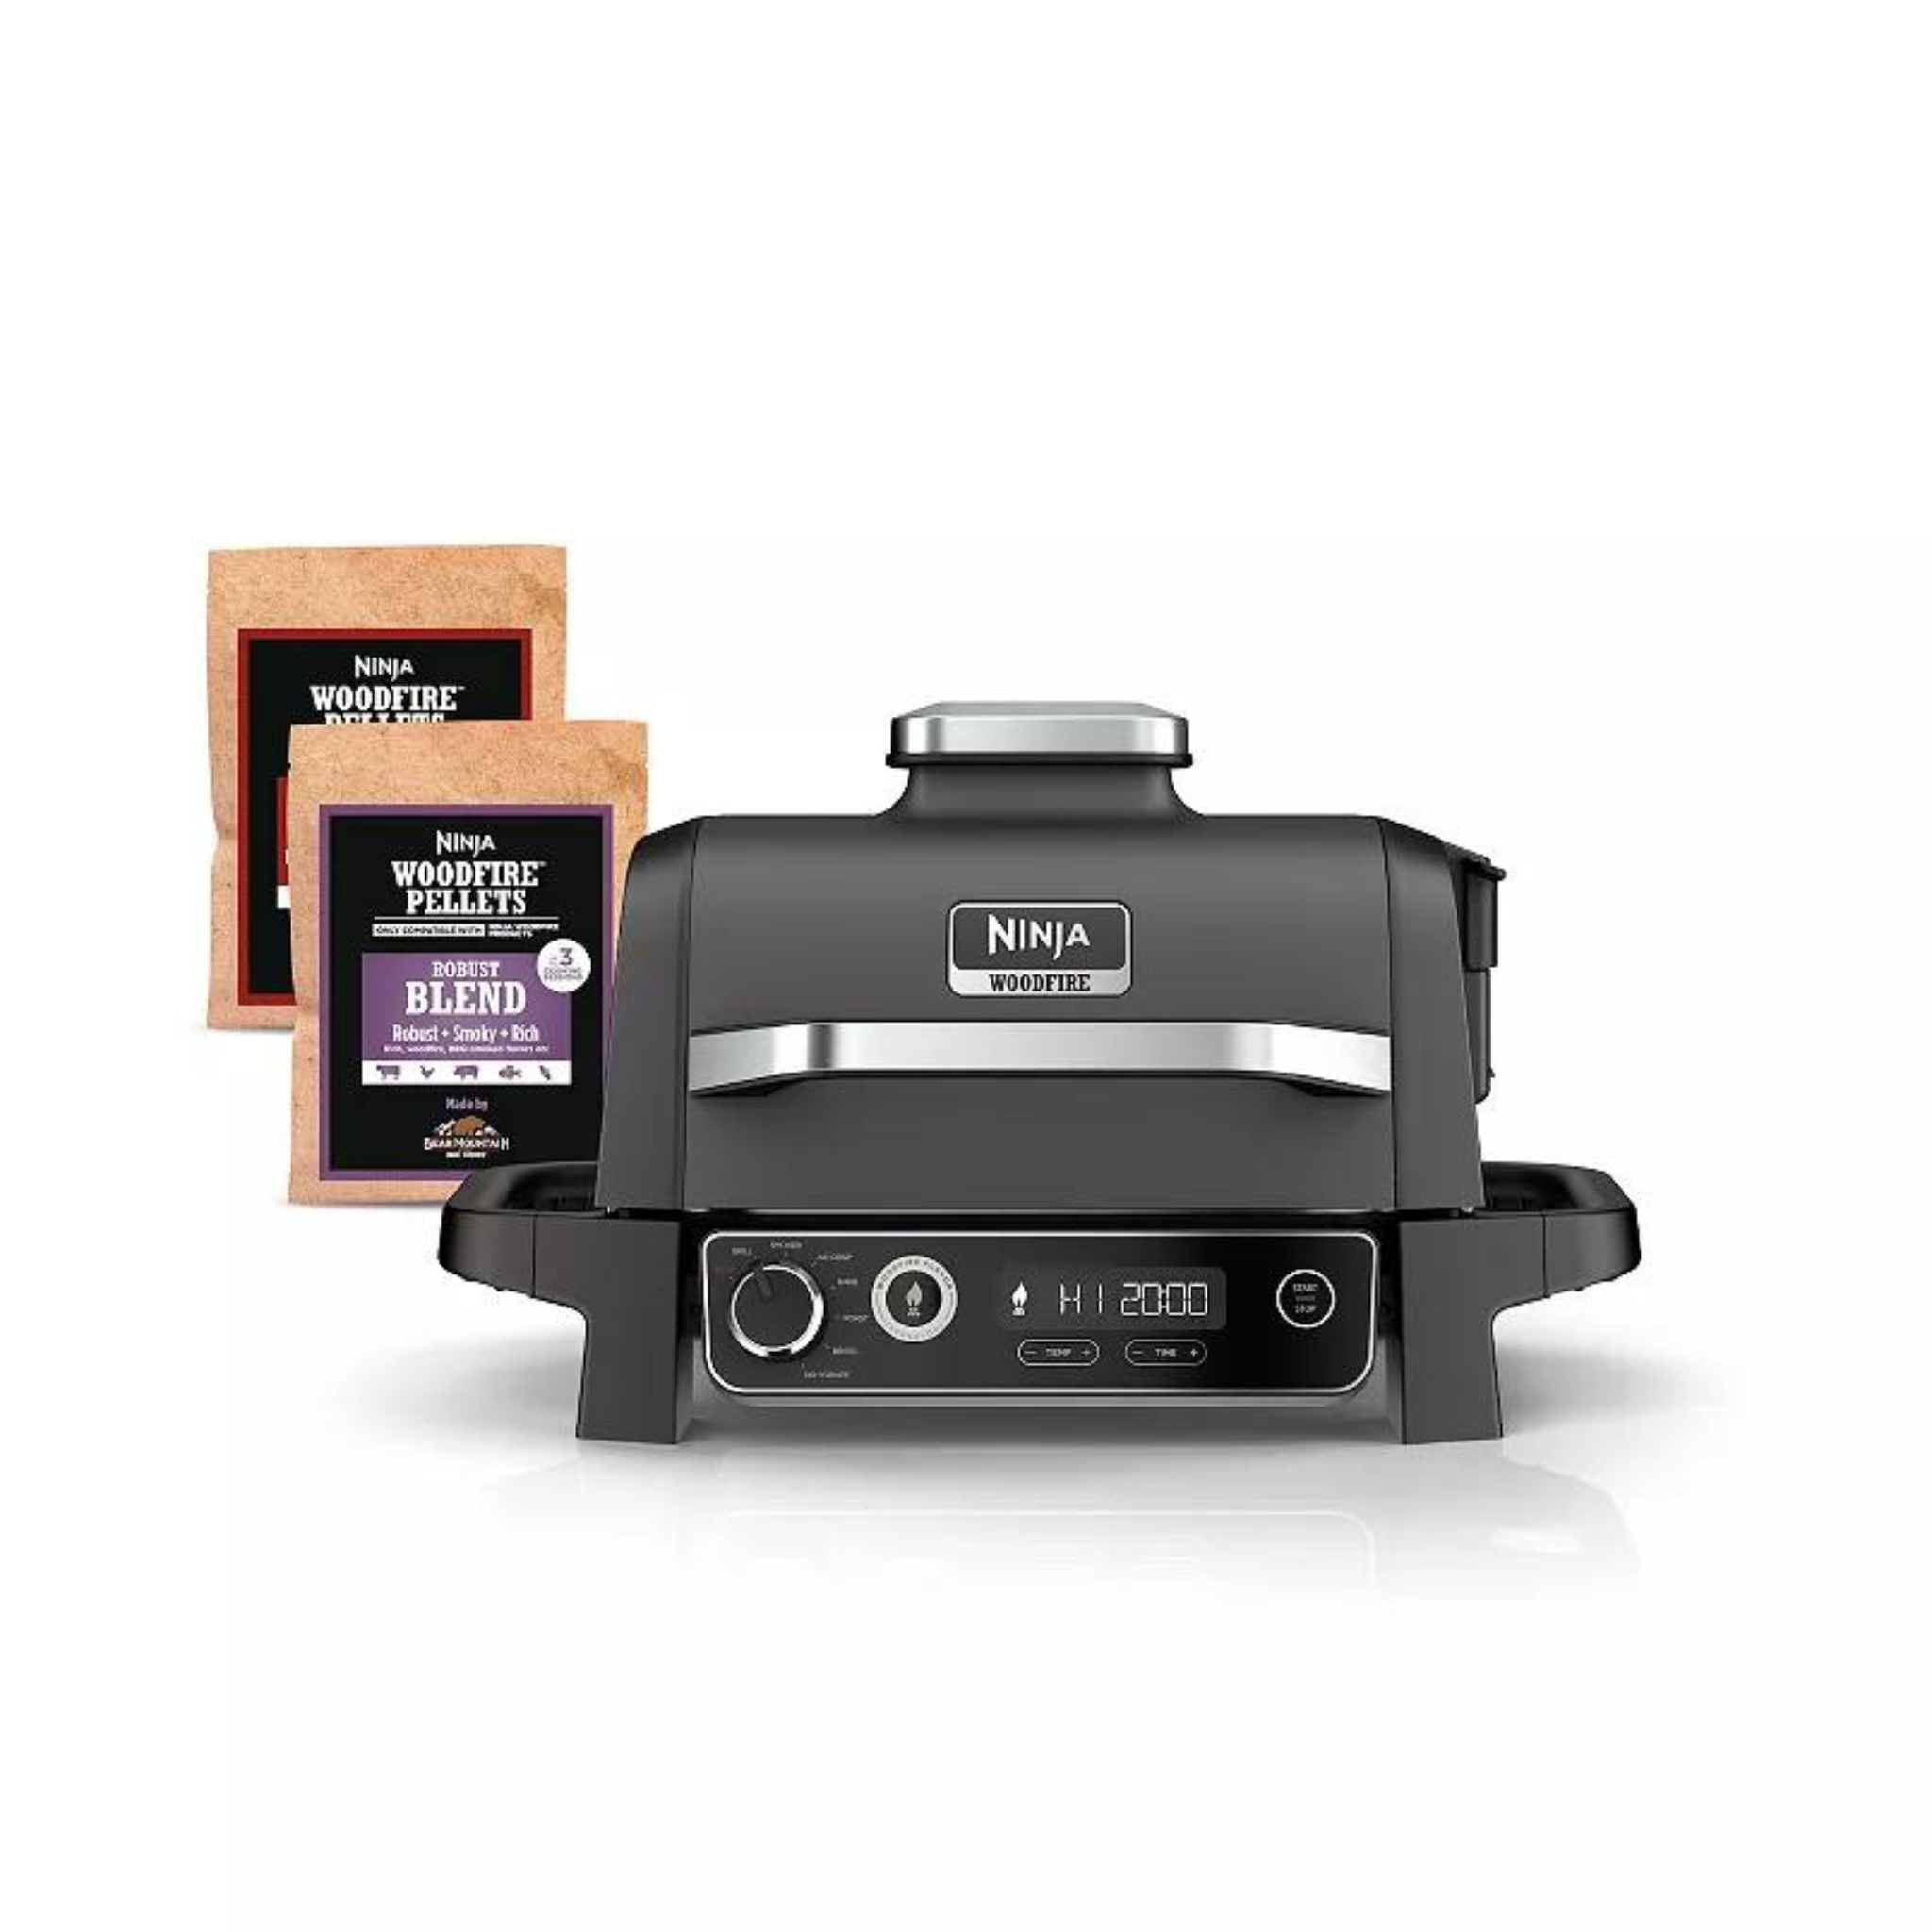 Ninja Woodfire 7-in-1 Outdoor Electric Master Grill & Smoker